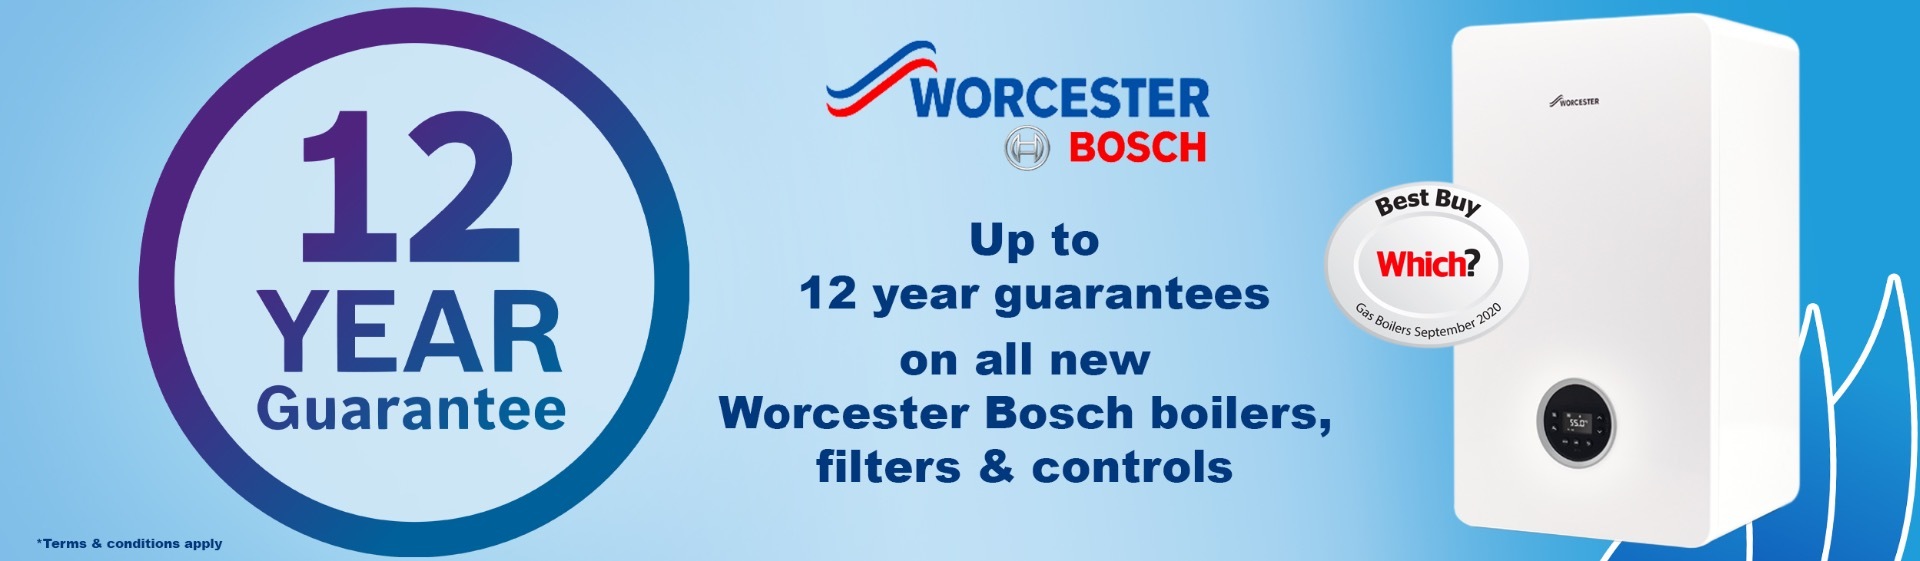 Up to 12 year guarantees on Worcester Bosch boilers, filters & controls, Which? Best Buy gas boilers September 2020